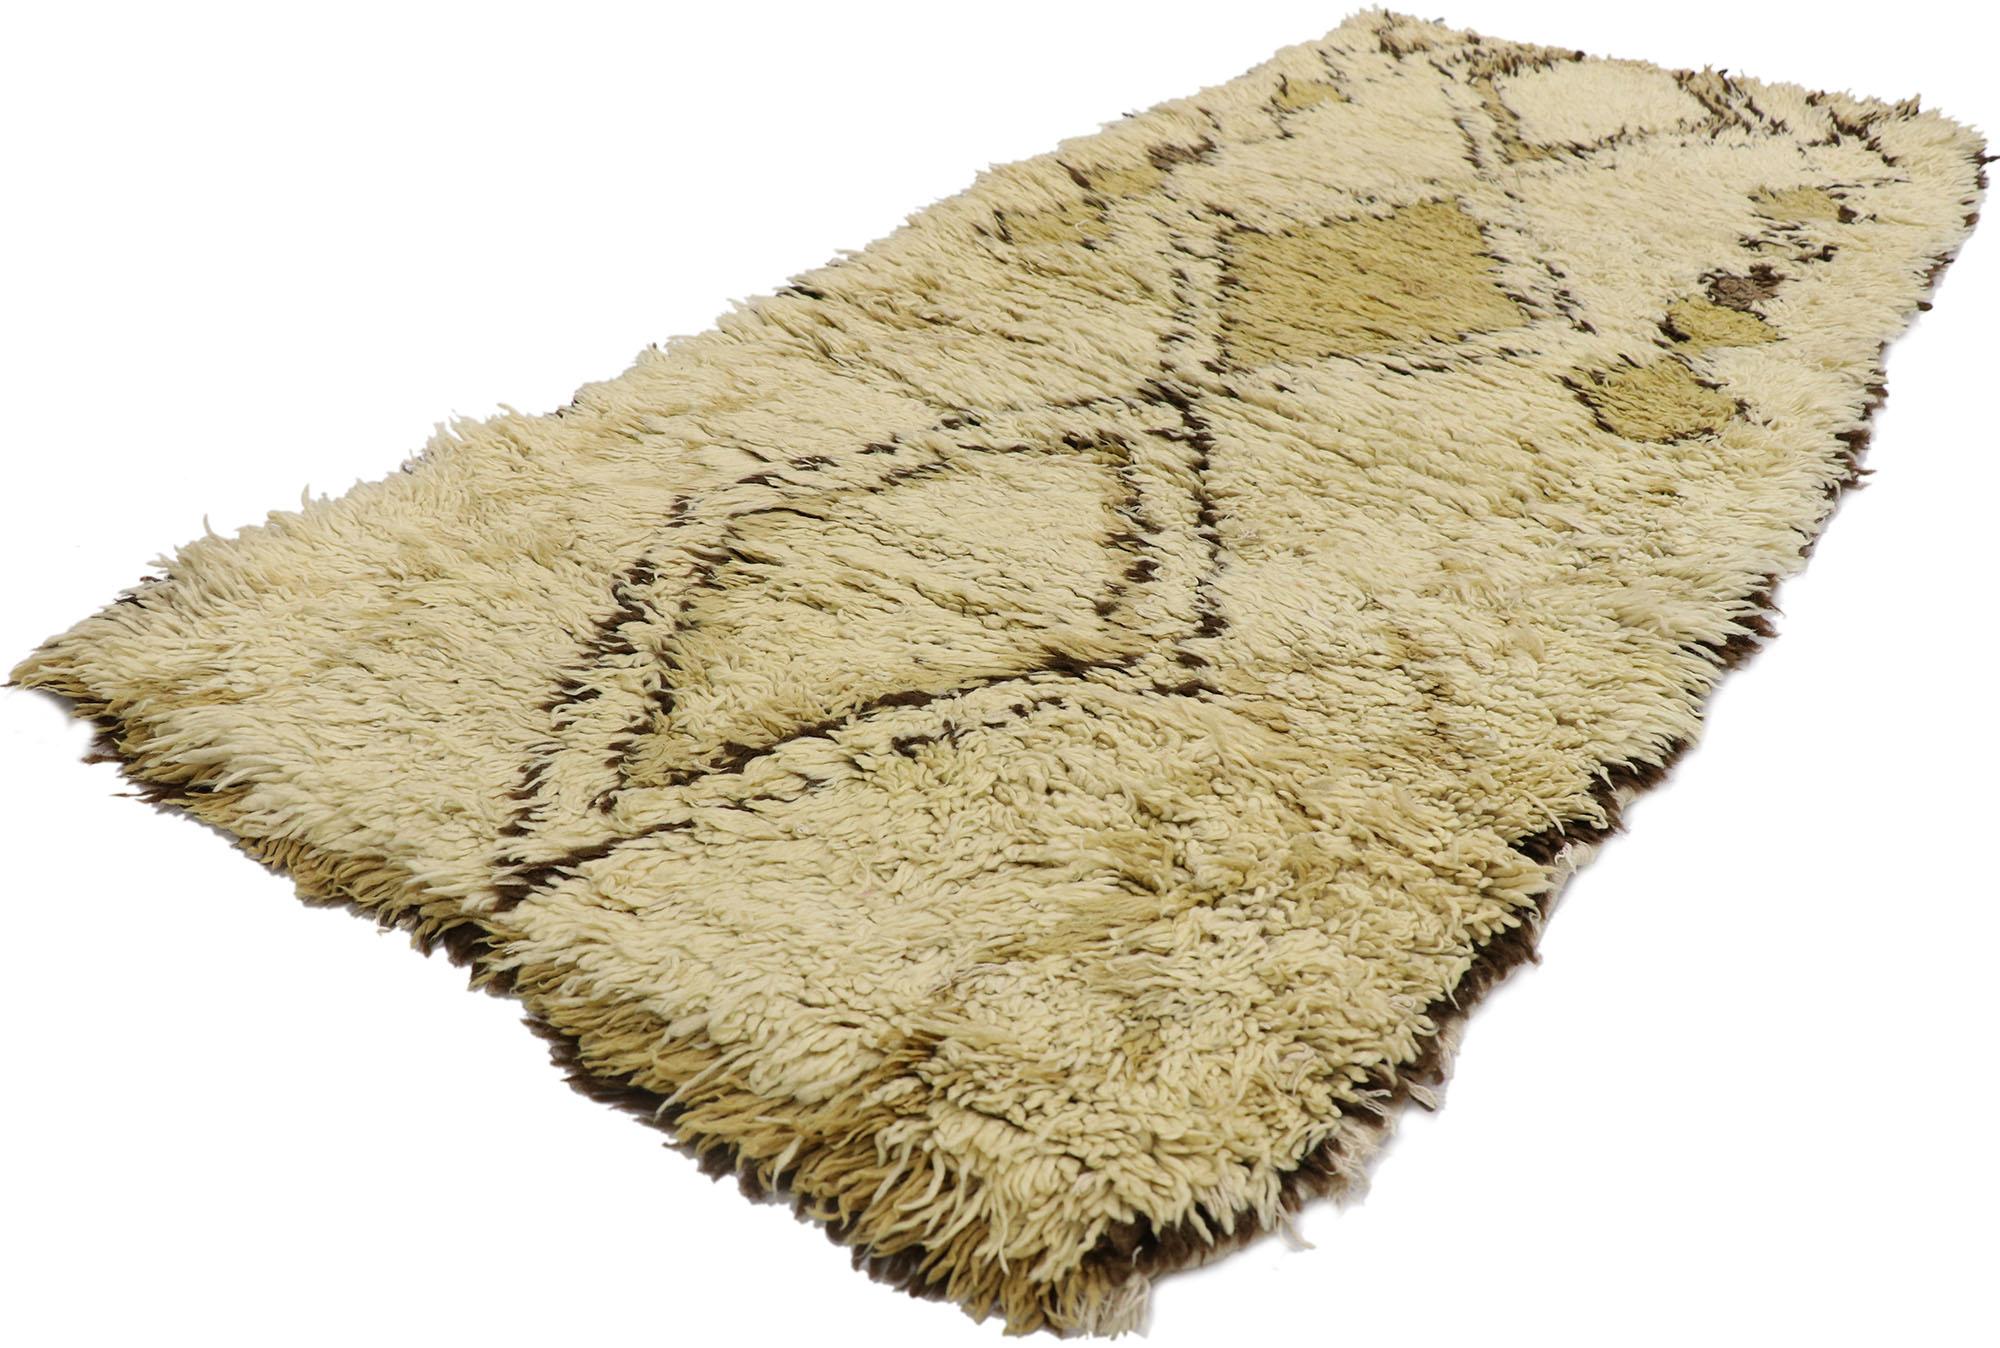 21564 Vintage Berber Moroccan Rug, 02'05 x 05'03.
Emanating rugged charm with nomadic style, this hand knotted wool vintage Berber Moroccan rug is a captivating vision of woven beauty. The detailed tribal design and neutral colors woven into this